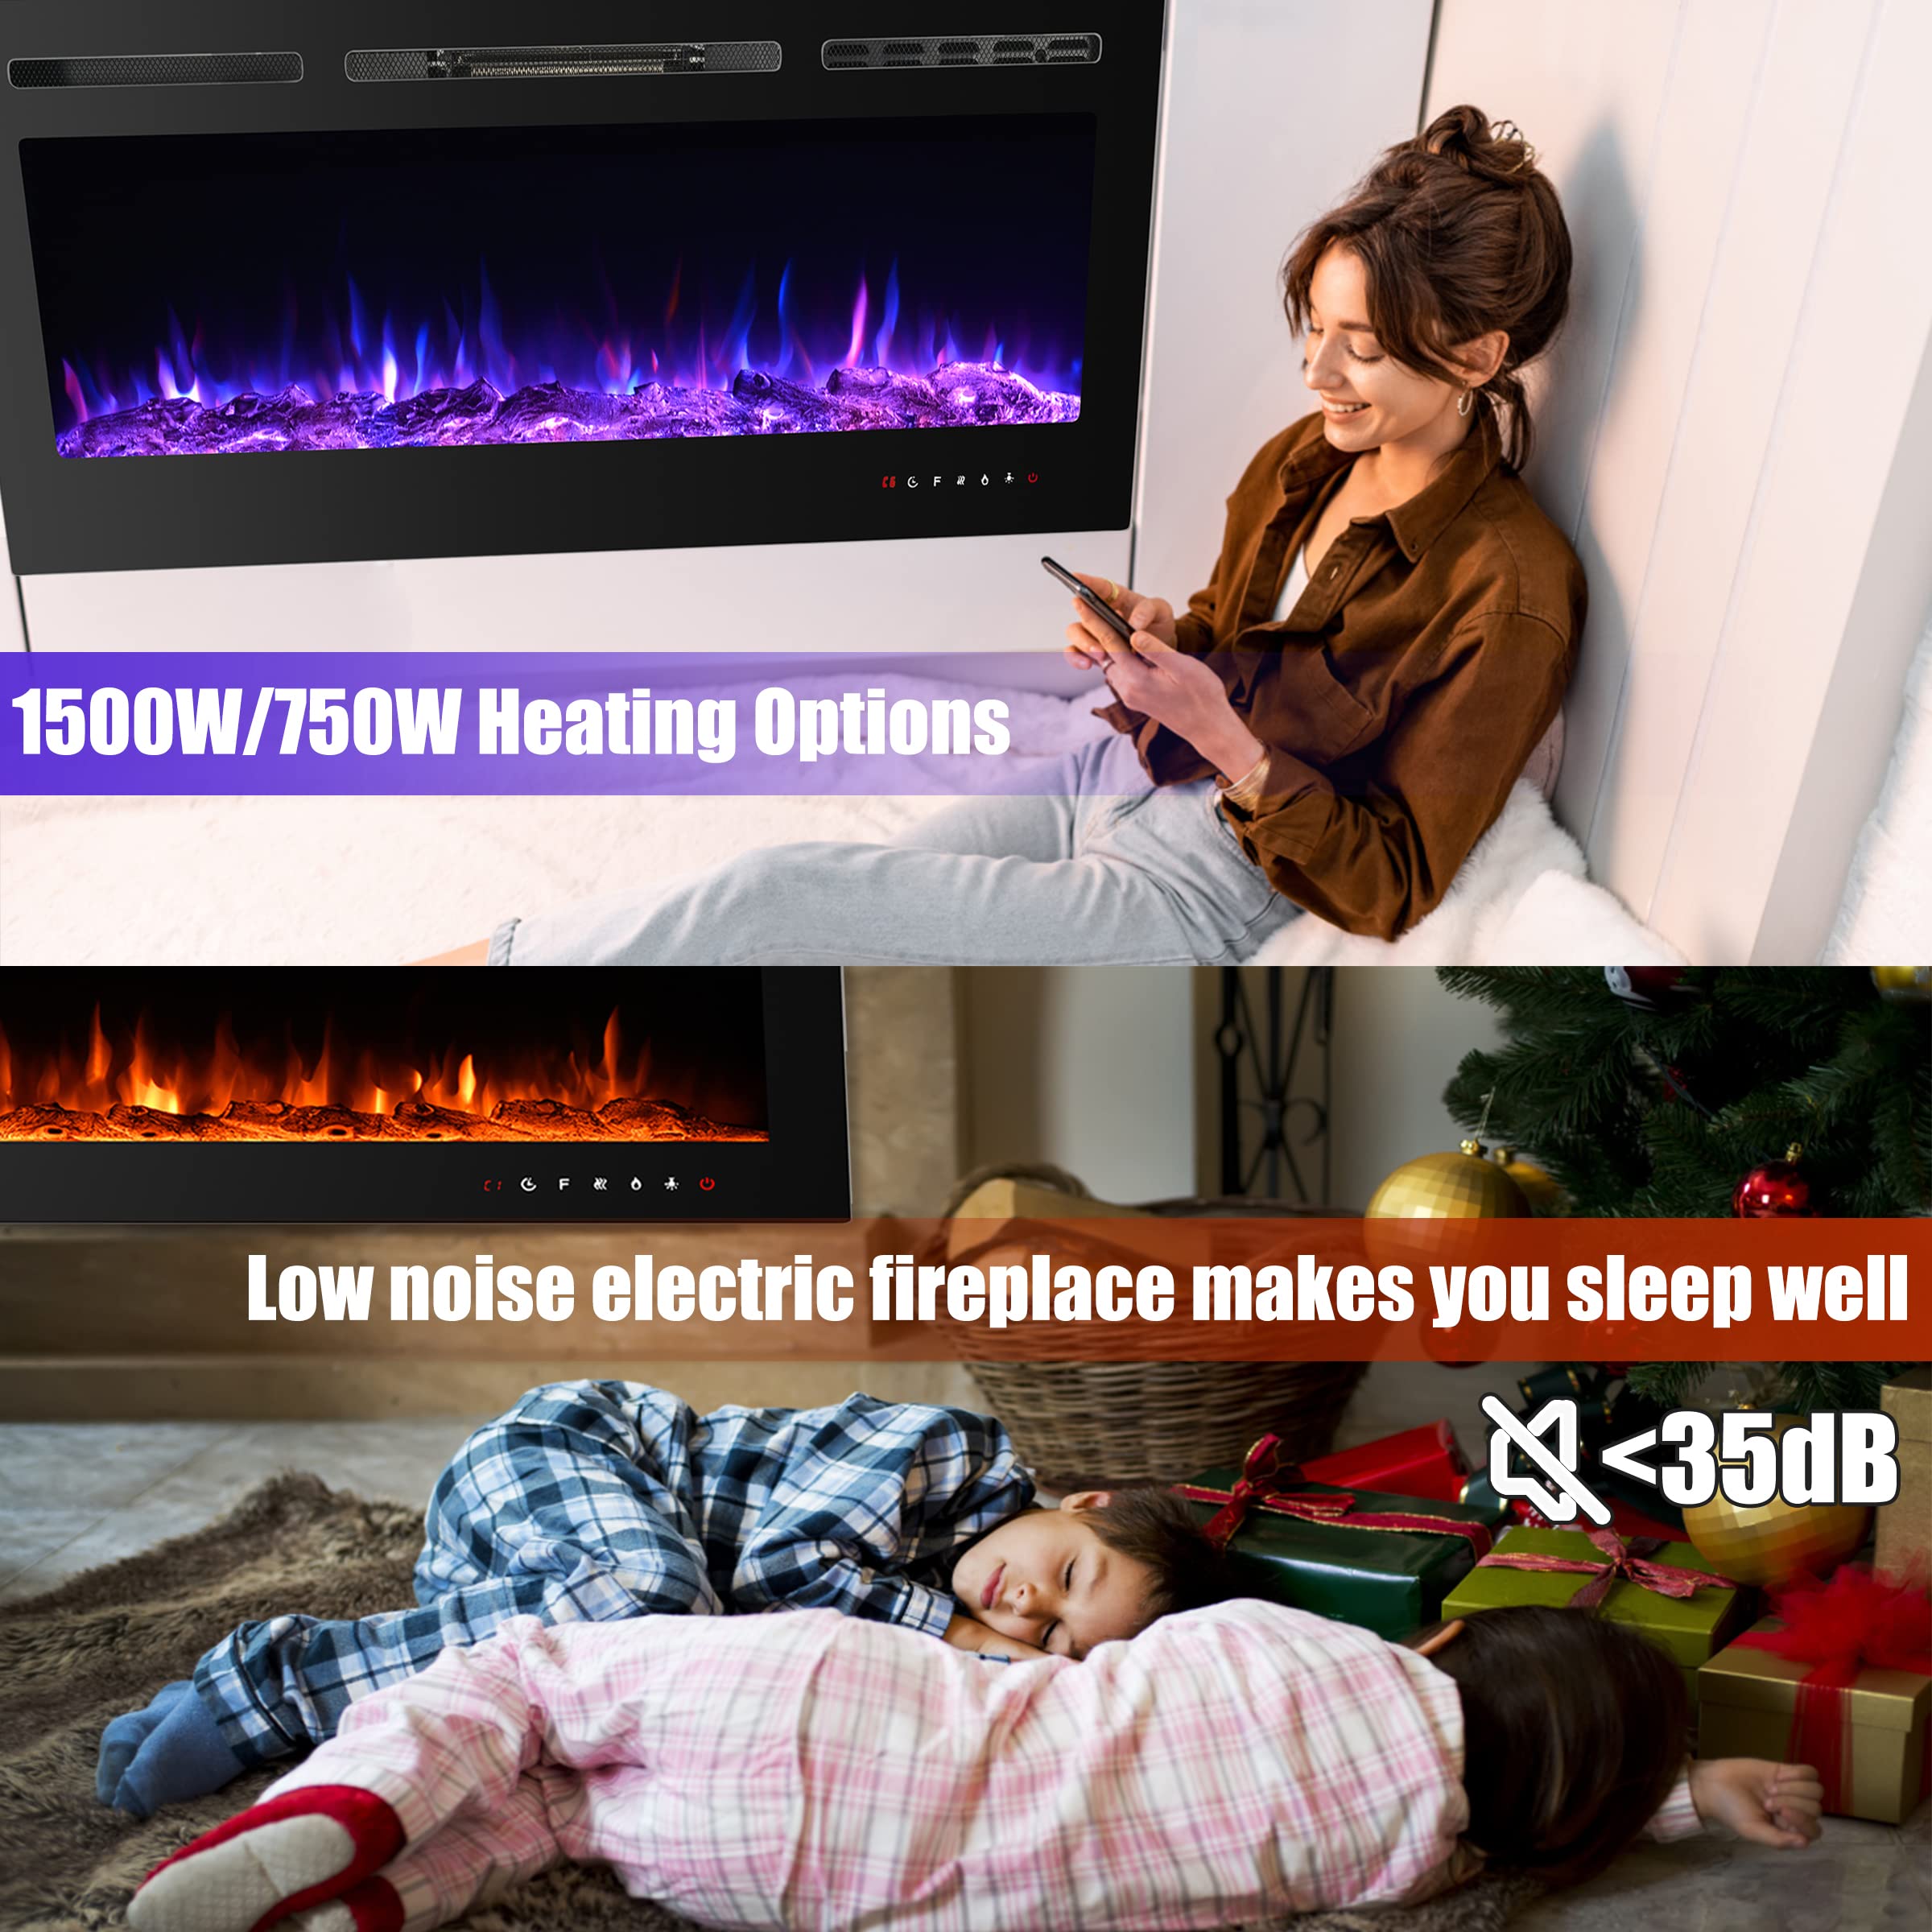 60 Inches Recessed Electric Fireplace Insert, 9 Levels Adjustable Flame Brightness Energy Saving Heating Electric Fireplace Heater W/ Touch Panel, Remote Control, Sleep Mode, 2 Heating Options, Black